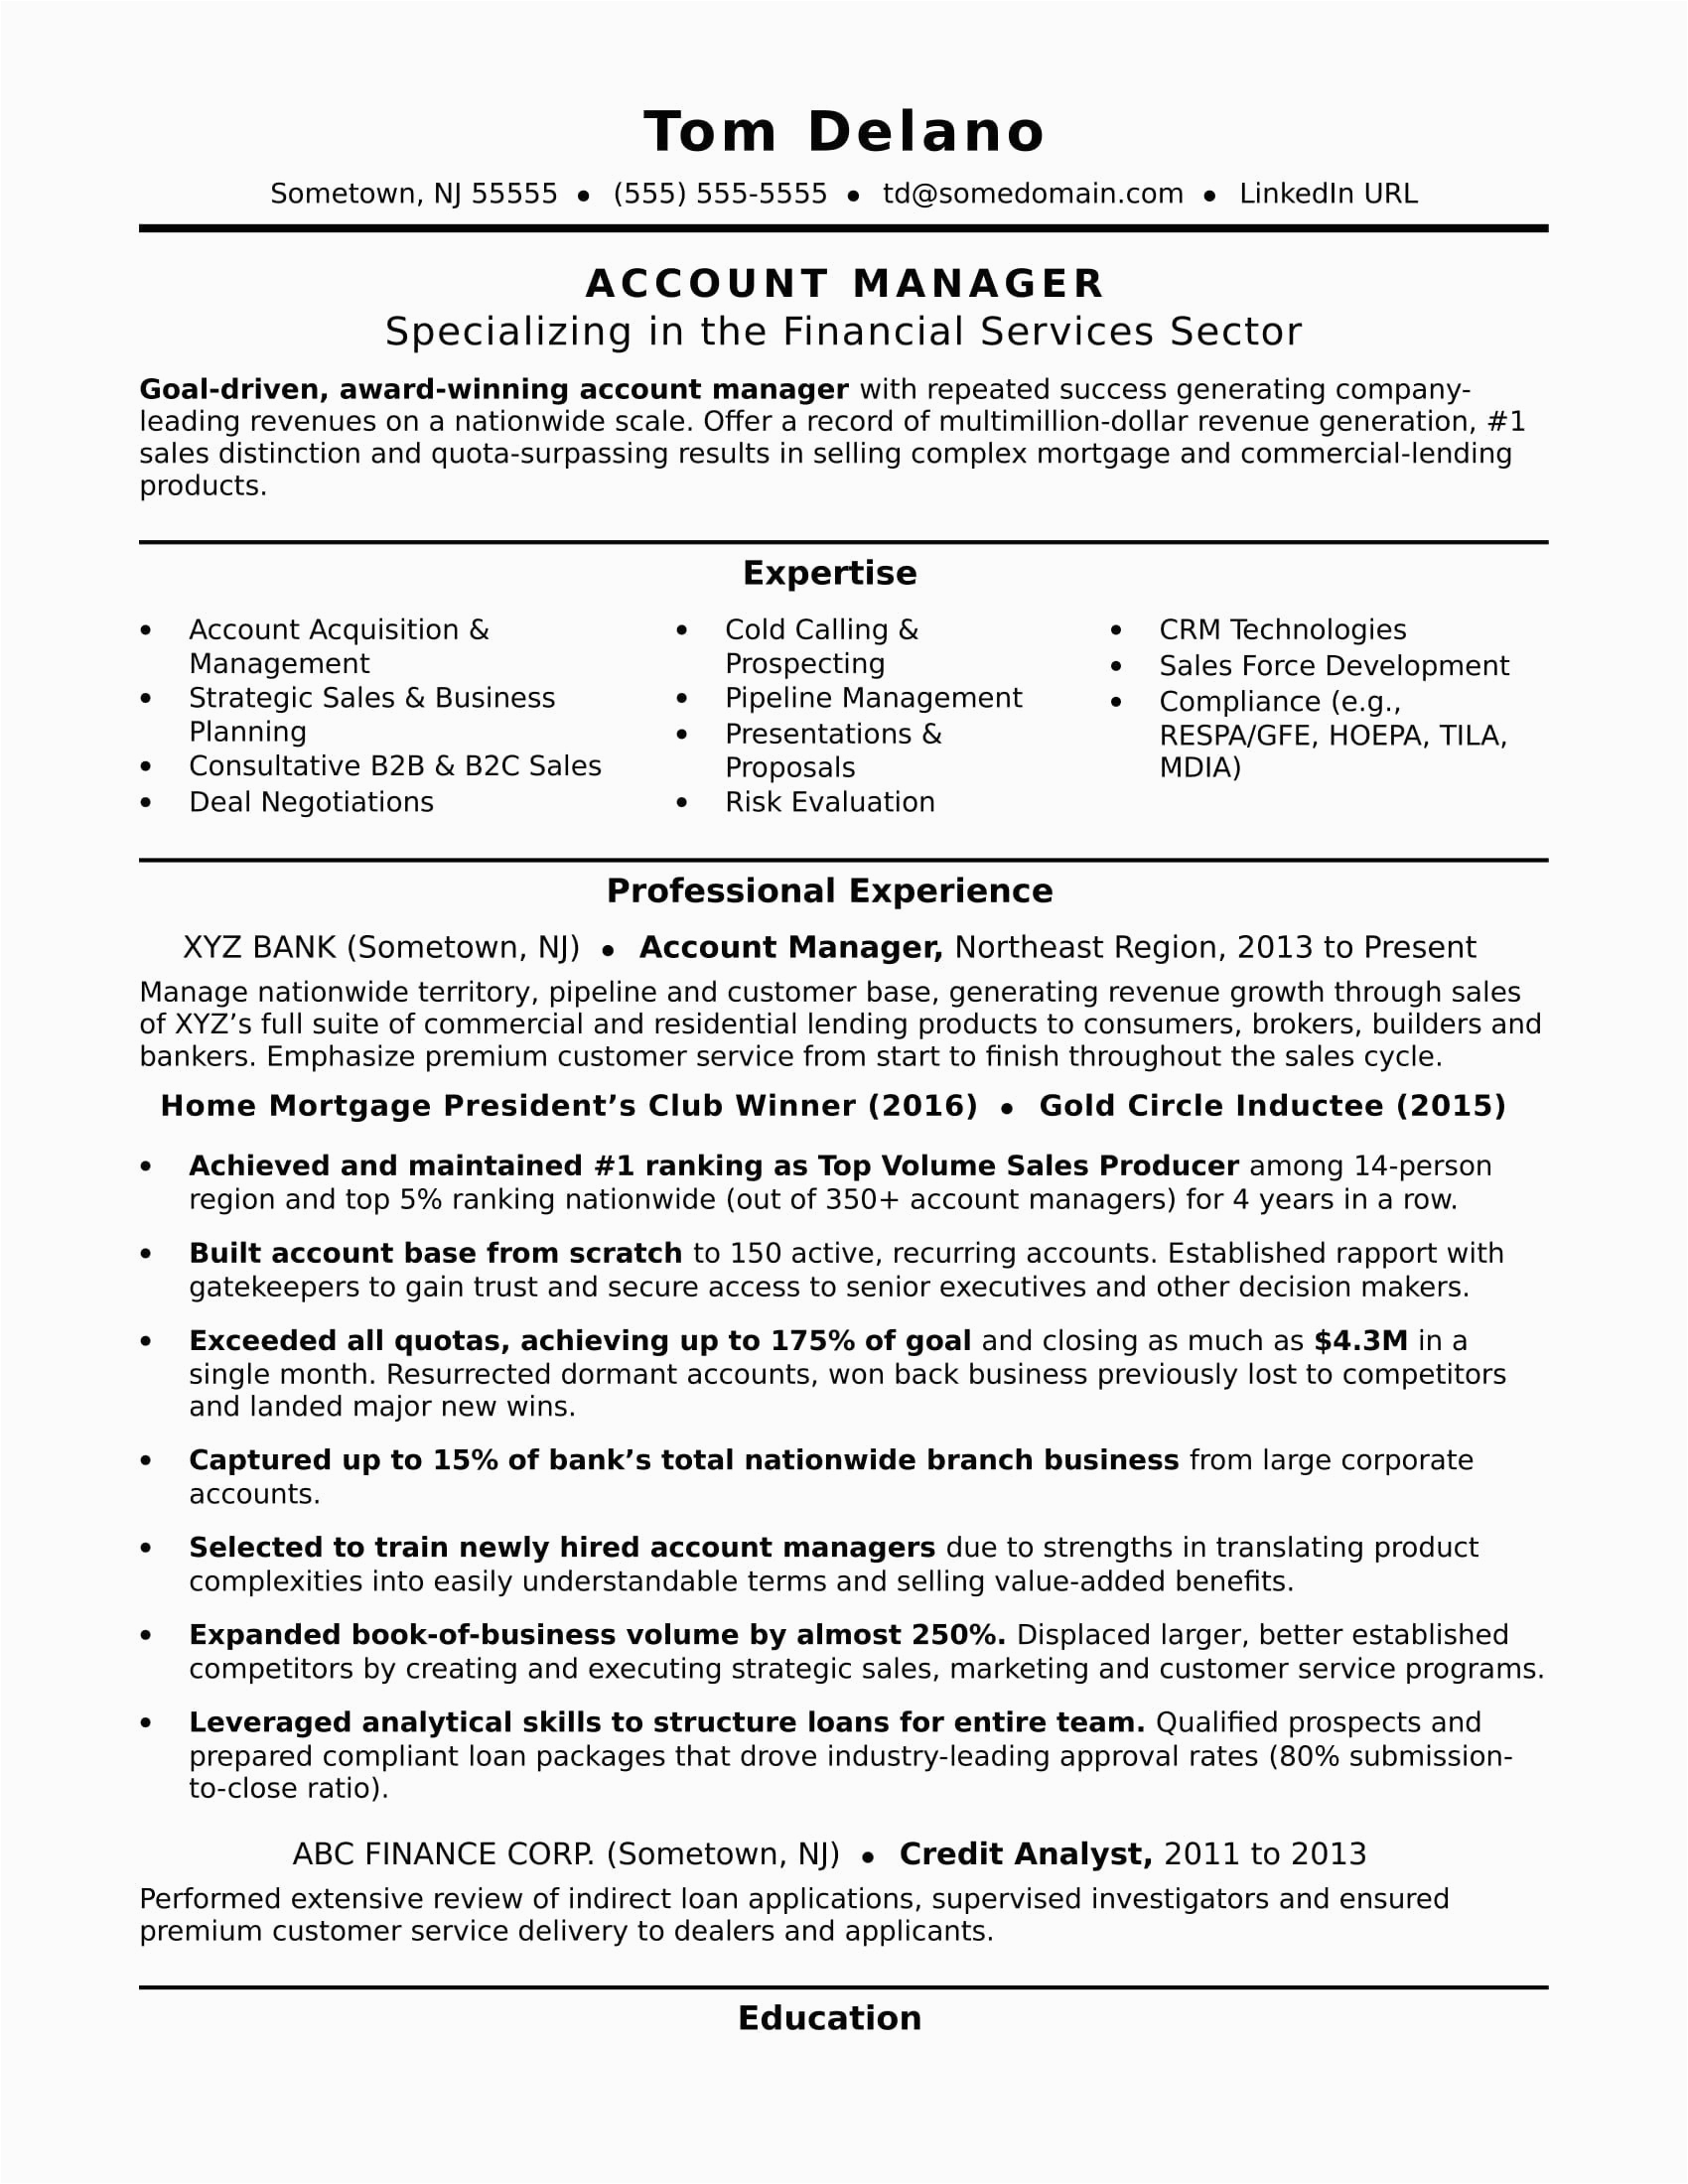 Accounts Manager Sample Resume In India Account Manager Resume Sample In India 2021